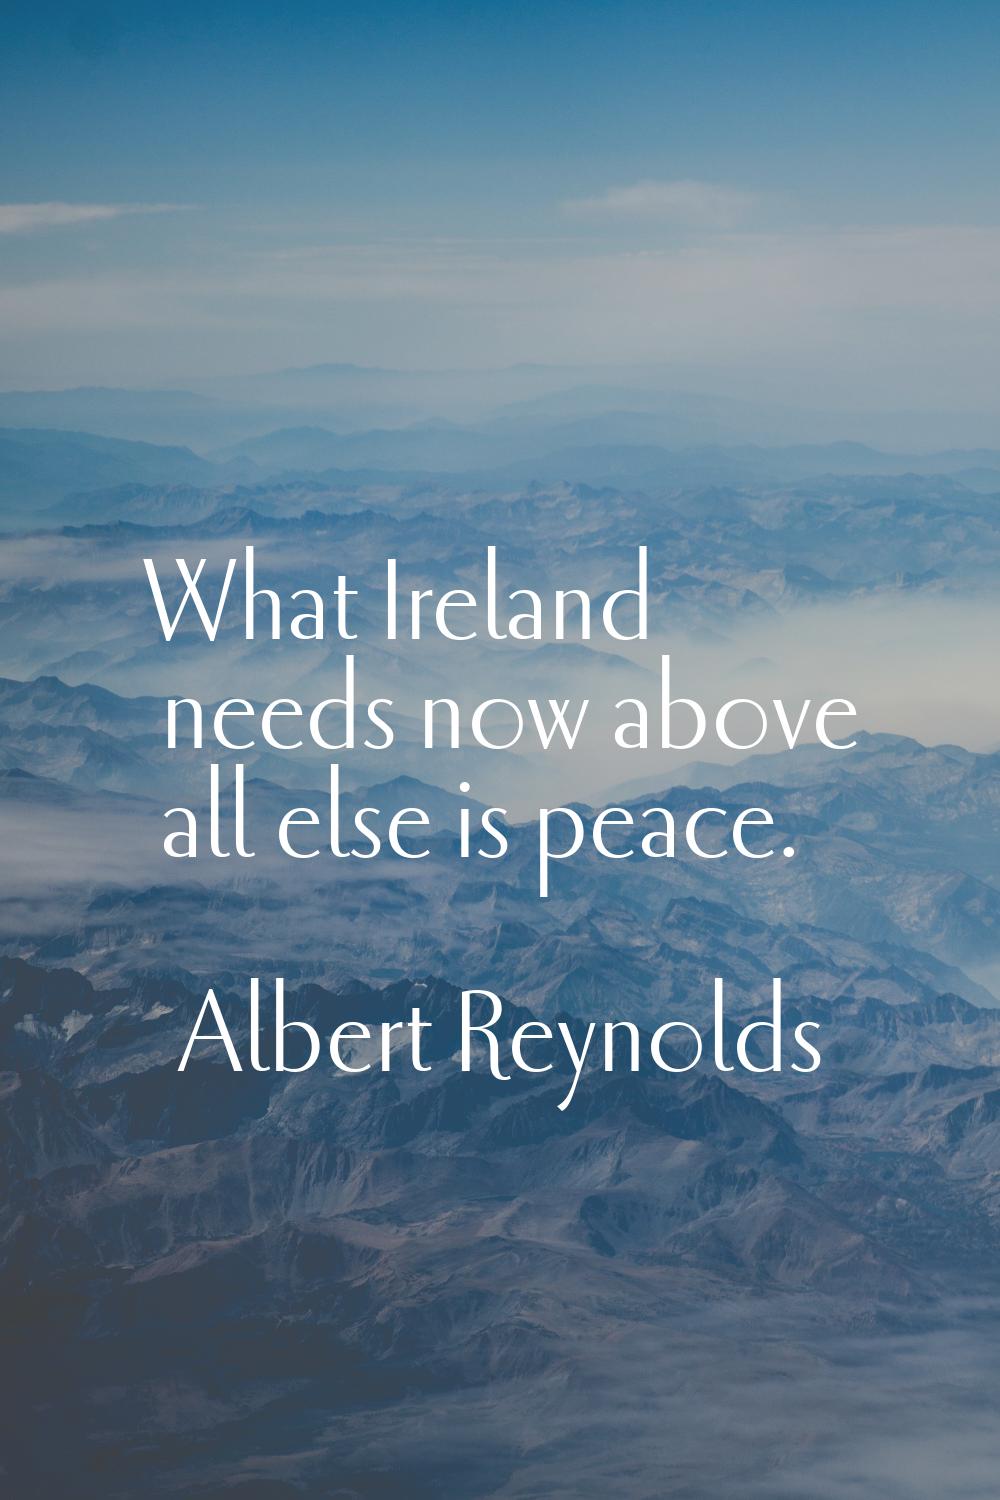 What Ireland needs now above all else is peace.